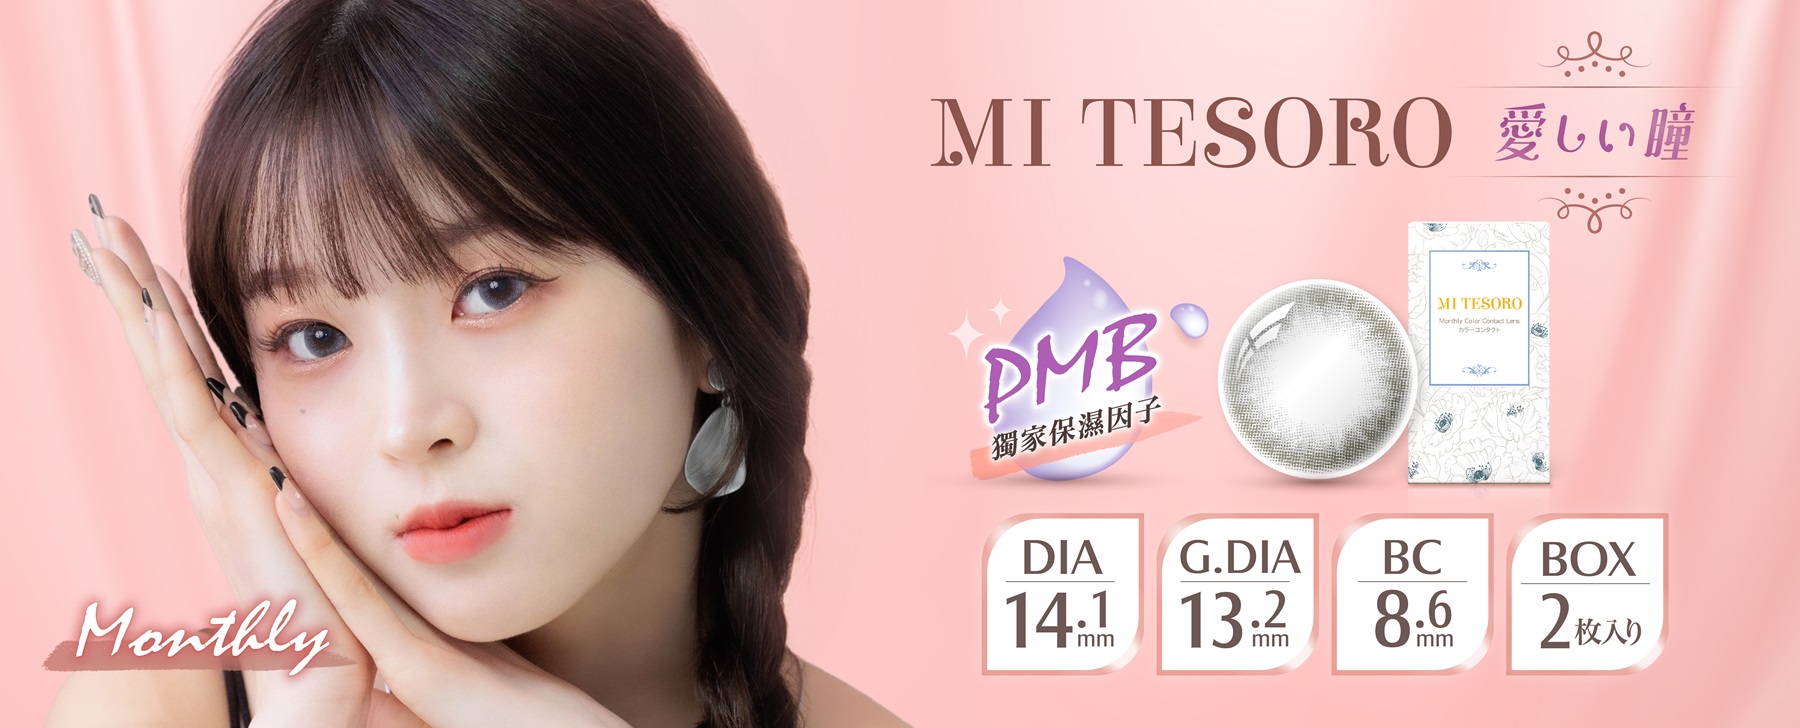 【Monthly • DIA14.1mm】Mi Tesoro Color Contact Lens